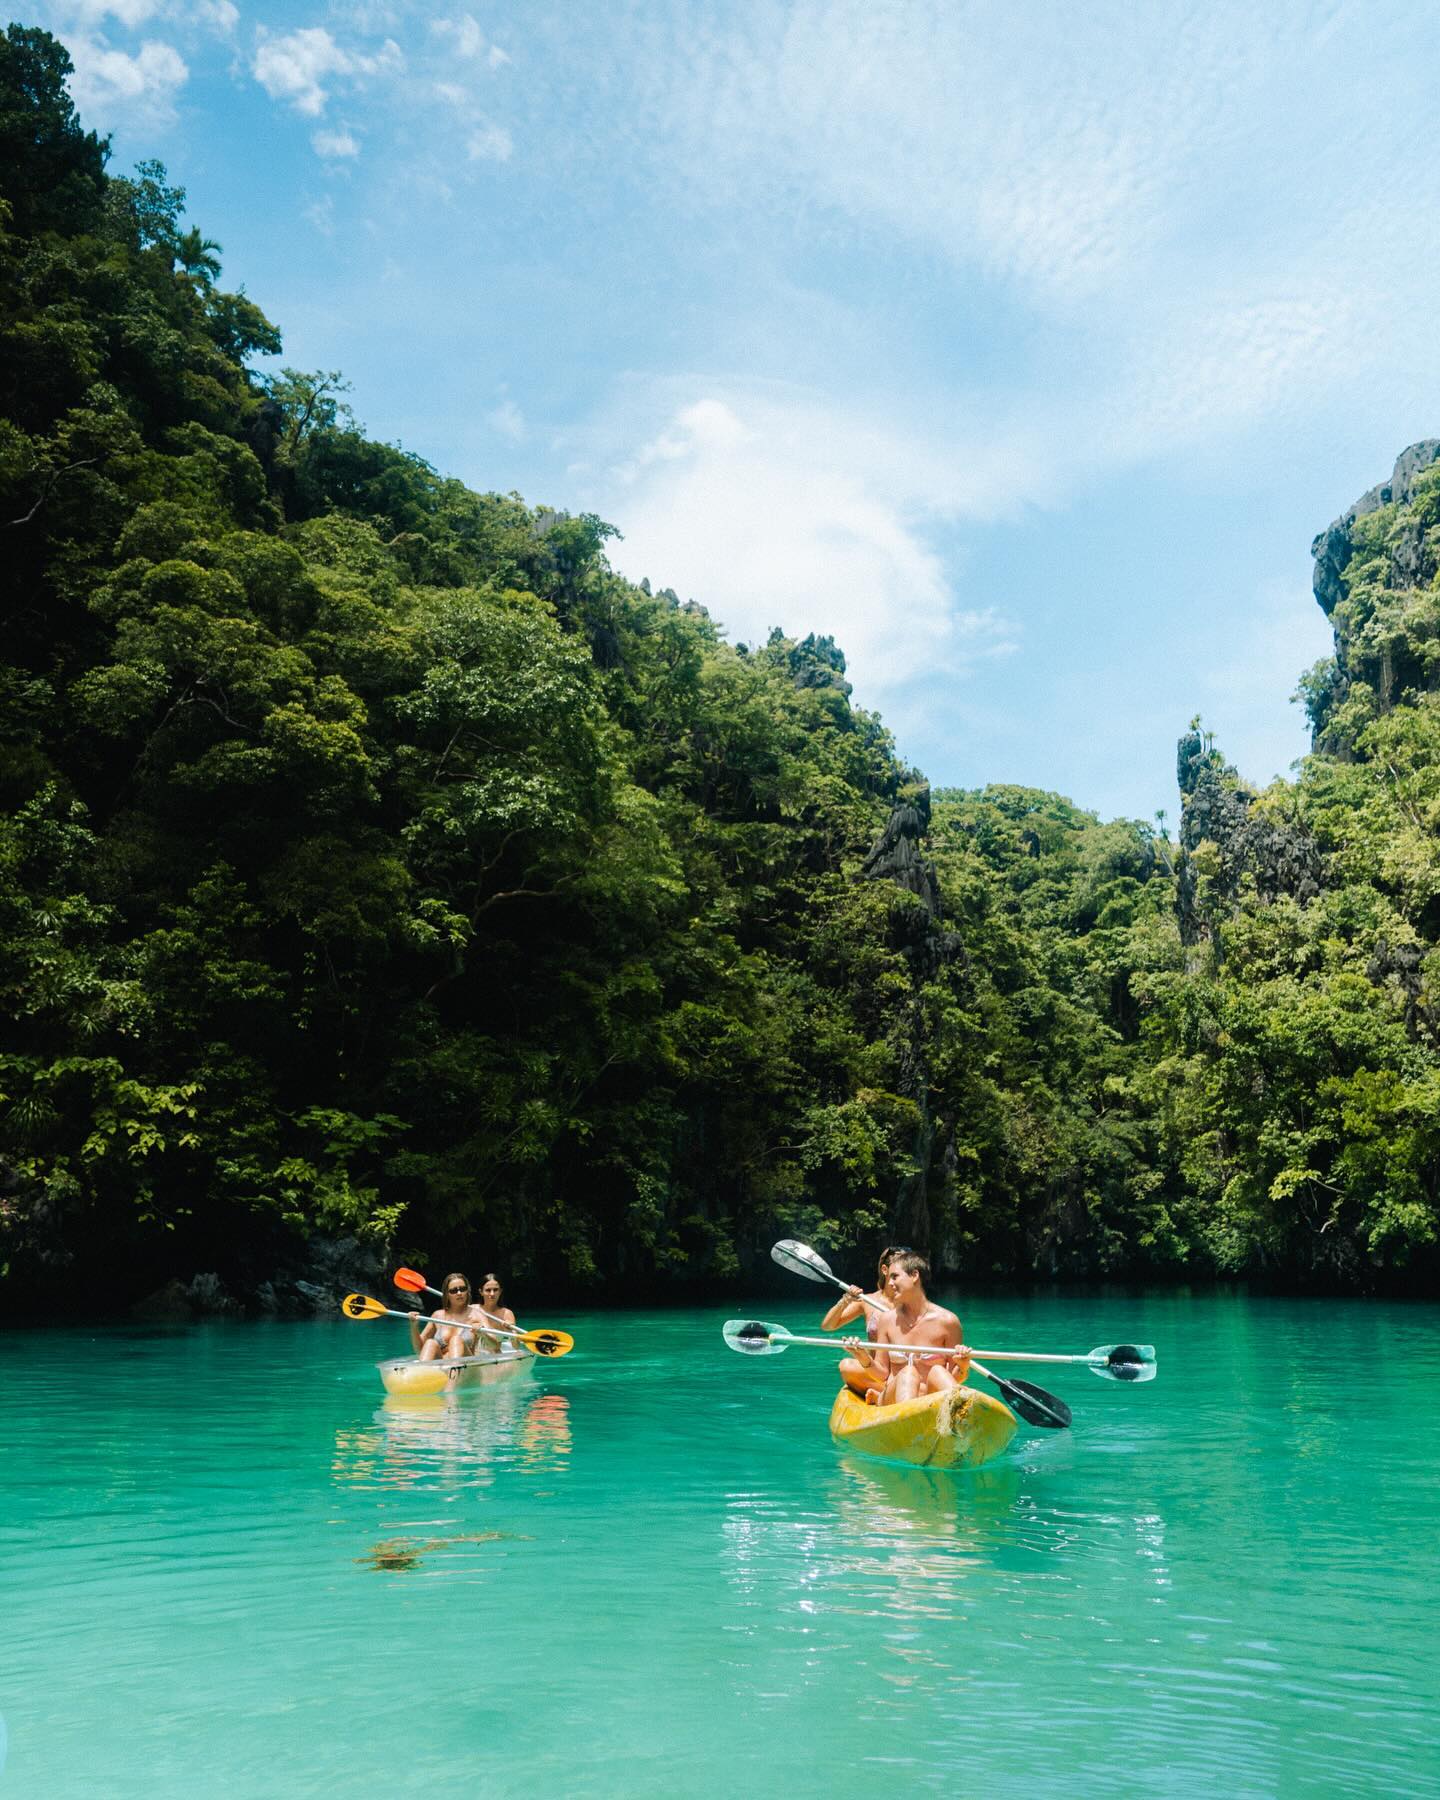 Brb just booking a trip to the Philippines🌴🌊 
•
•
•
•
•
#philippinestravel #islandhopping #travelphilippines #elnidopalawanphilippines #portbarton #puertoprincesa #grouptravel #wanderlust